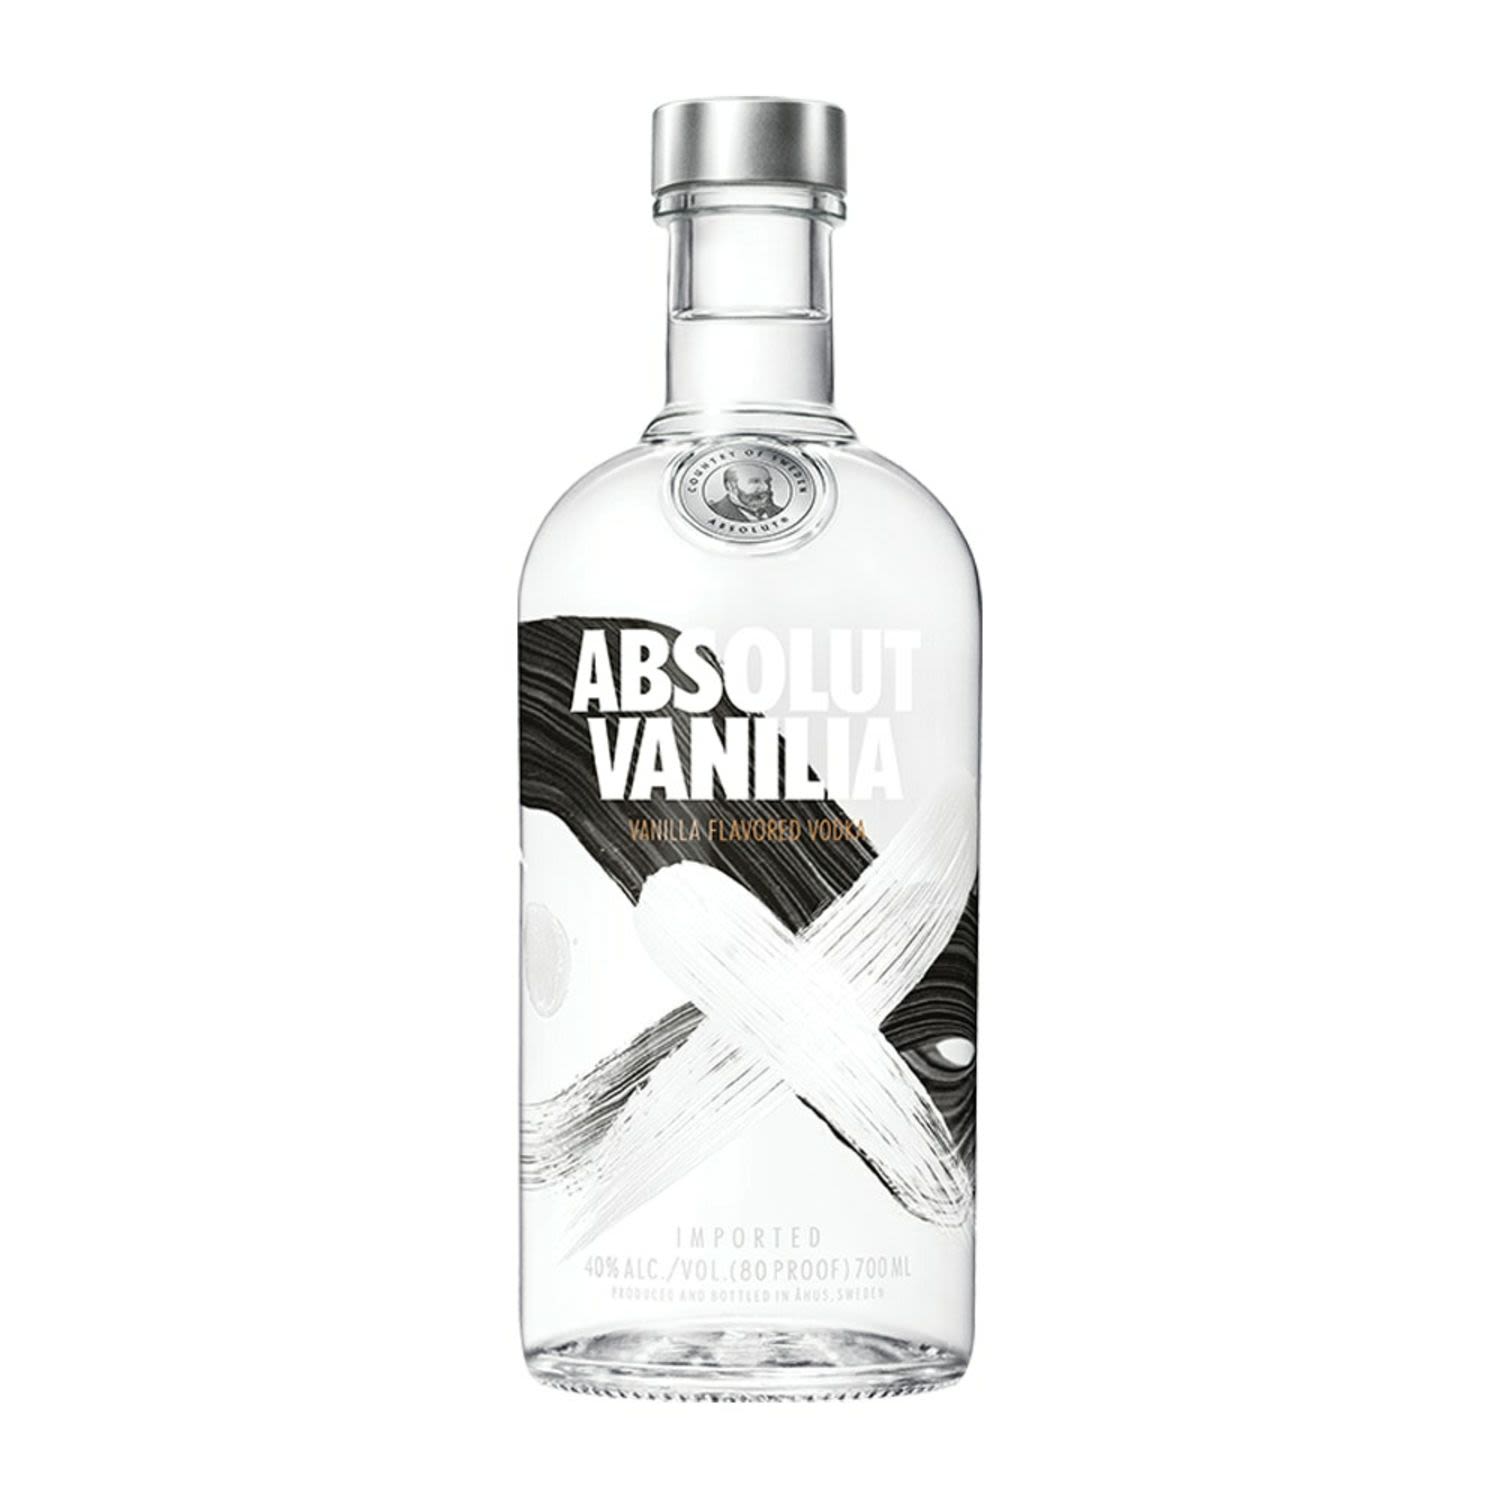 In true Swedish style, this Vodka has been designed to please all the senses. With just a dash of vanilla to smooth out the palate and add complexity, this Vodka is lifted to new heights. Flavoured Vodkas are the distinction of Absolut and date back over 400 years.<br /> <br />Alcohol Volume: 40.00%<br /><br />Pack Format: Bottle<br /><br />Standard Drinks: 22</br /><br />Pack Type: Bottle<br /><br />Country of Origin: Sweden<br />